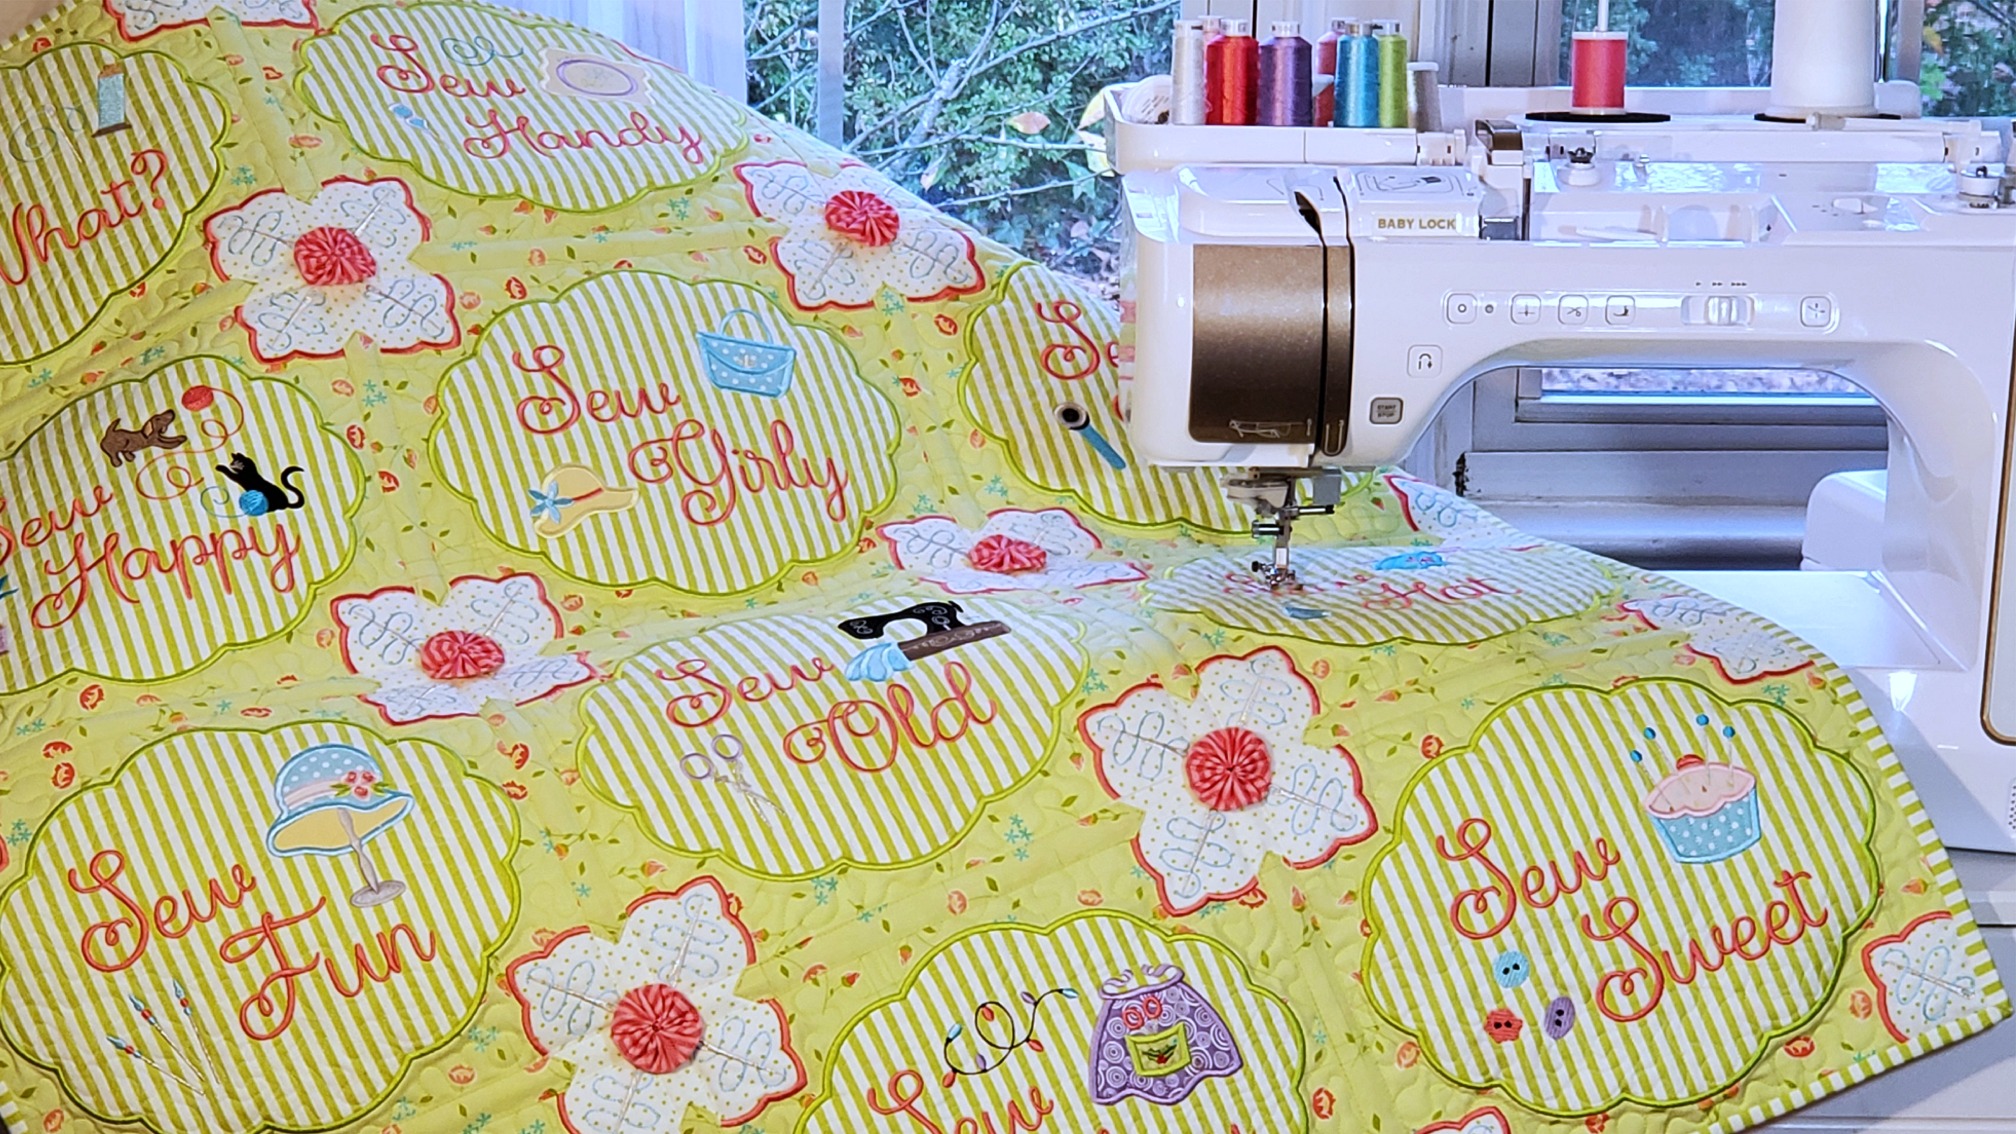 Sew Crazy Quilt by Shelly Smola